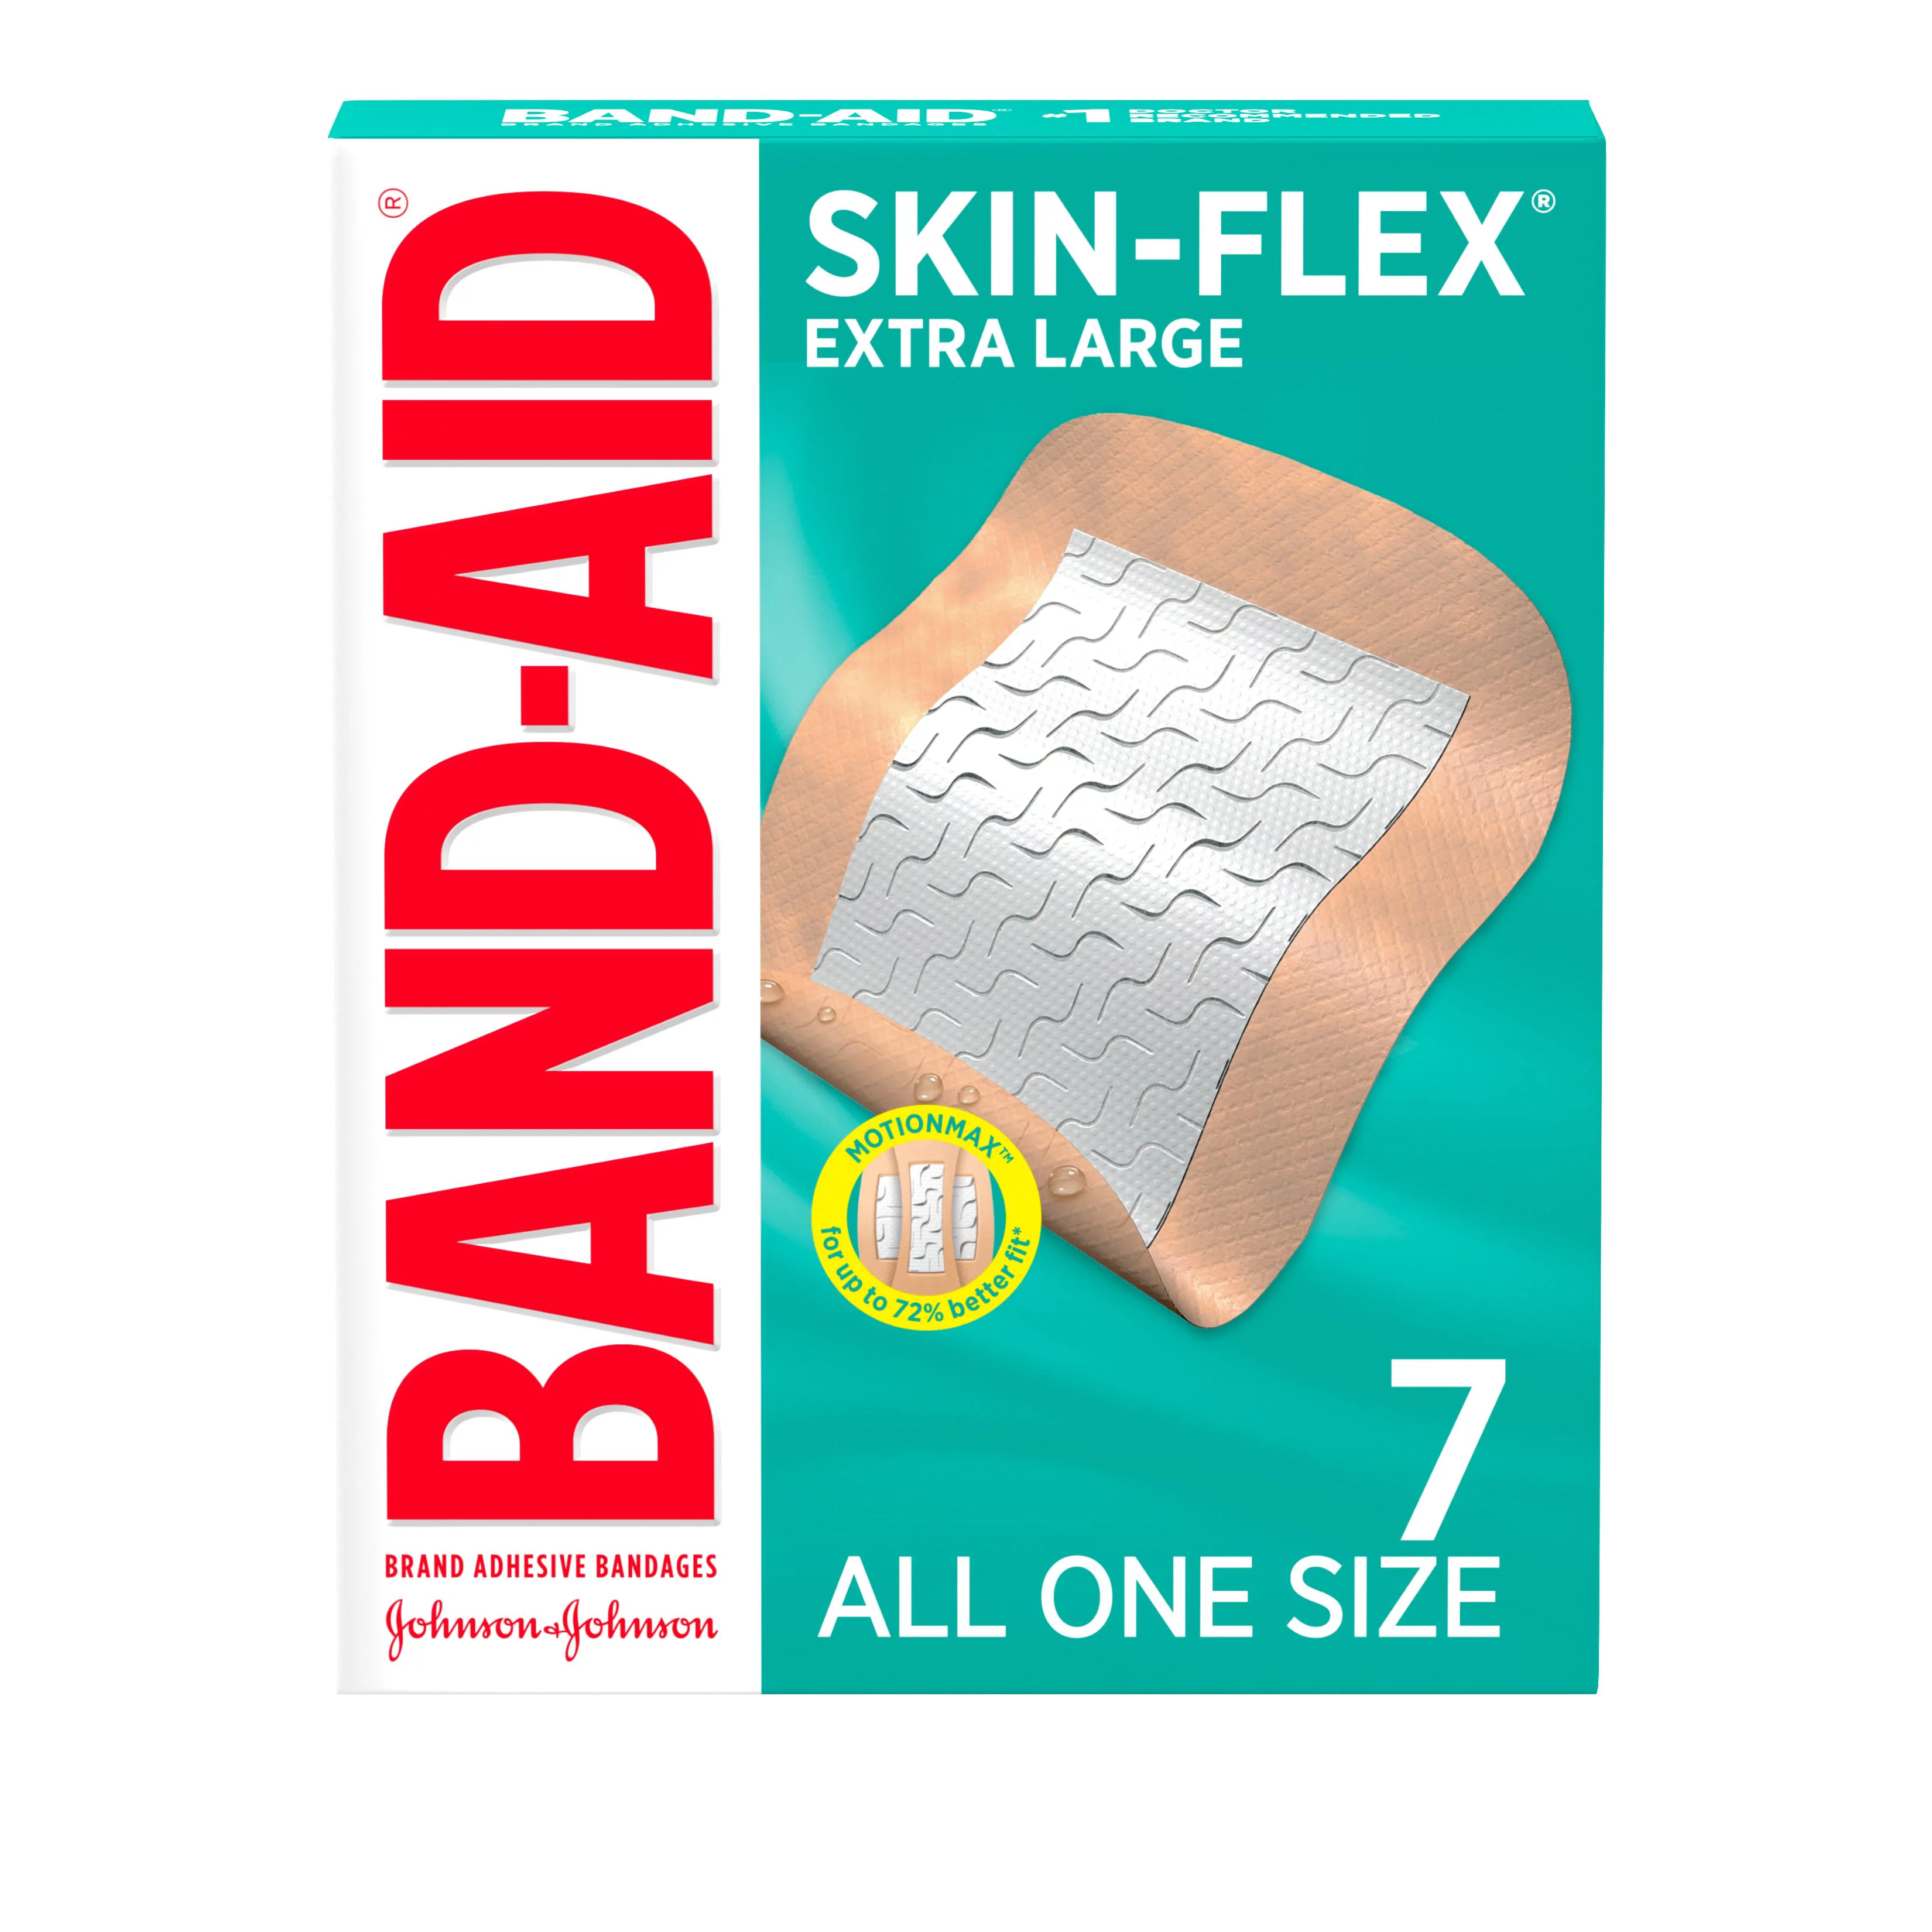 Comfort Zone Liquid Bandage, Topical Analgesic and Antiseptic, Protective  Skin Barrier for Small Cuts and Wounds, 1 Ounce (1 Pack)